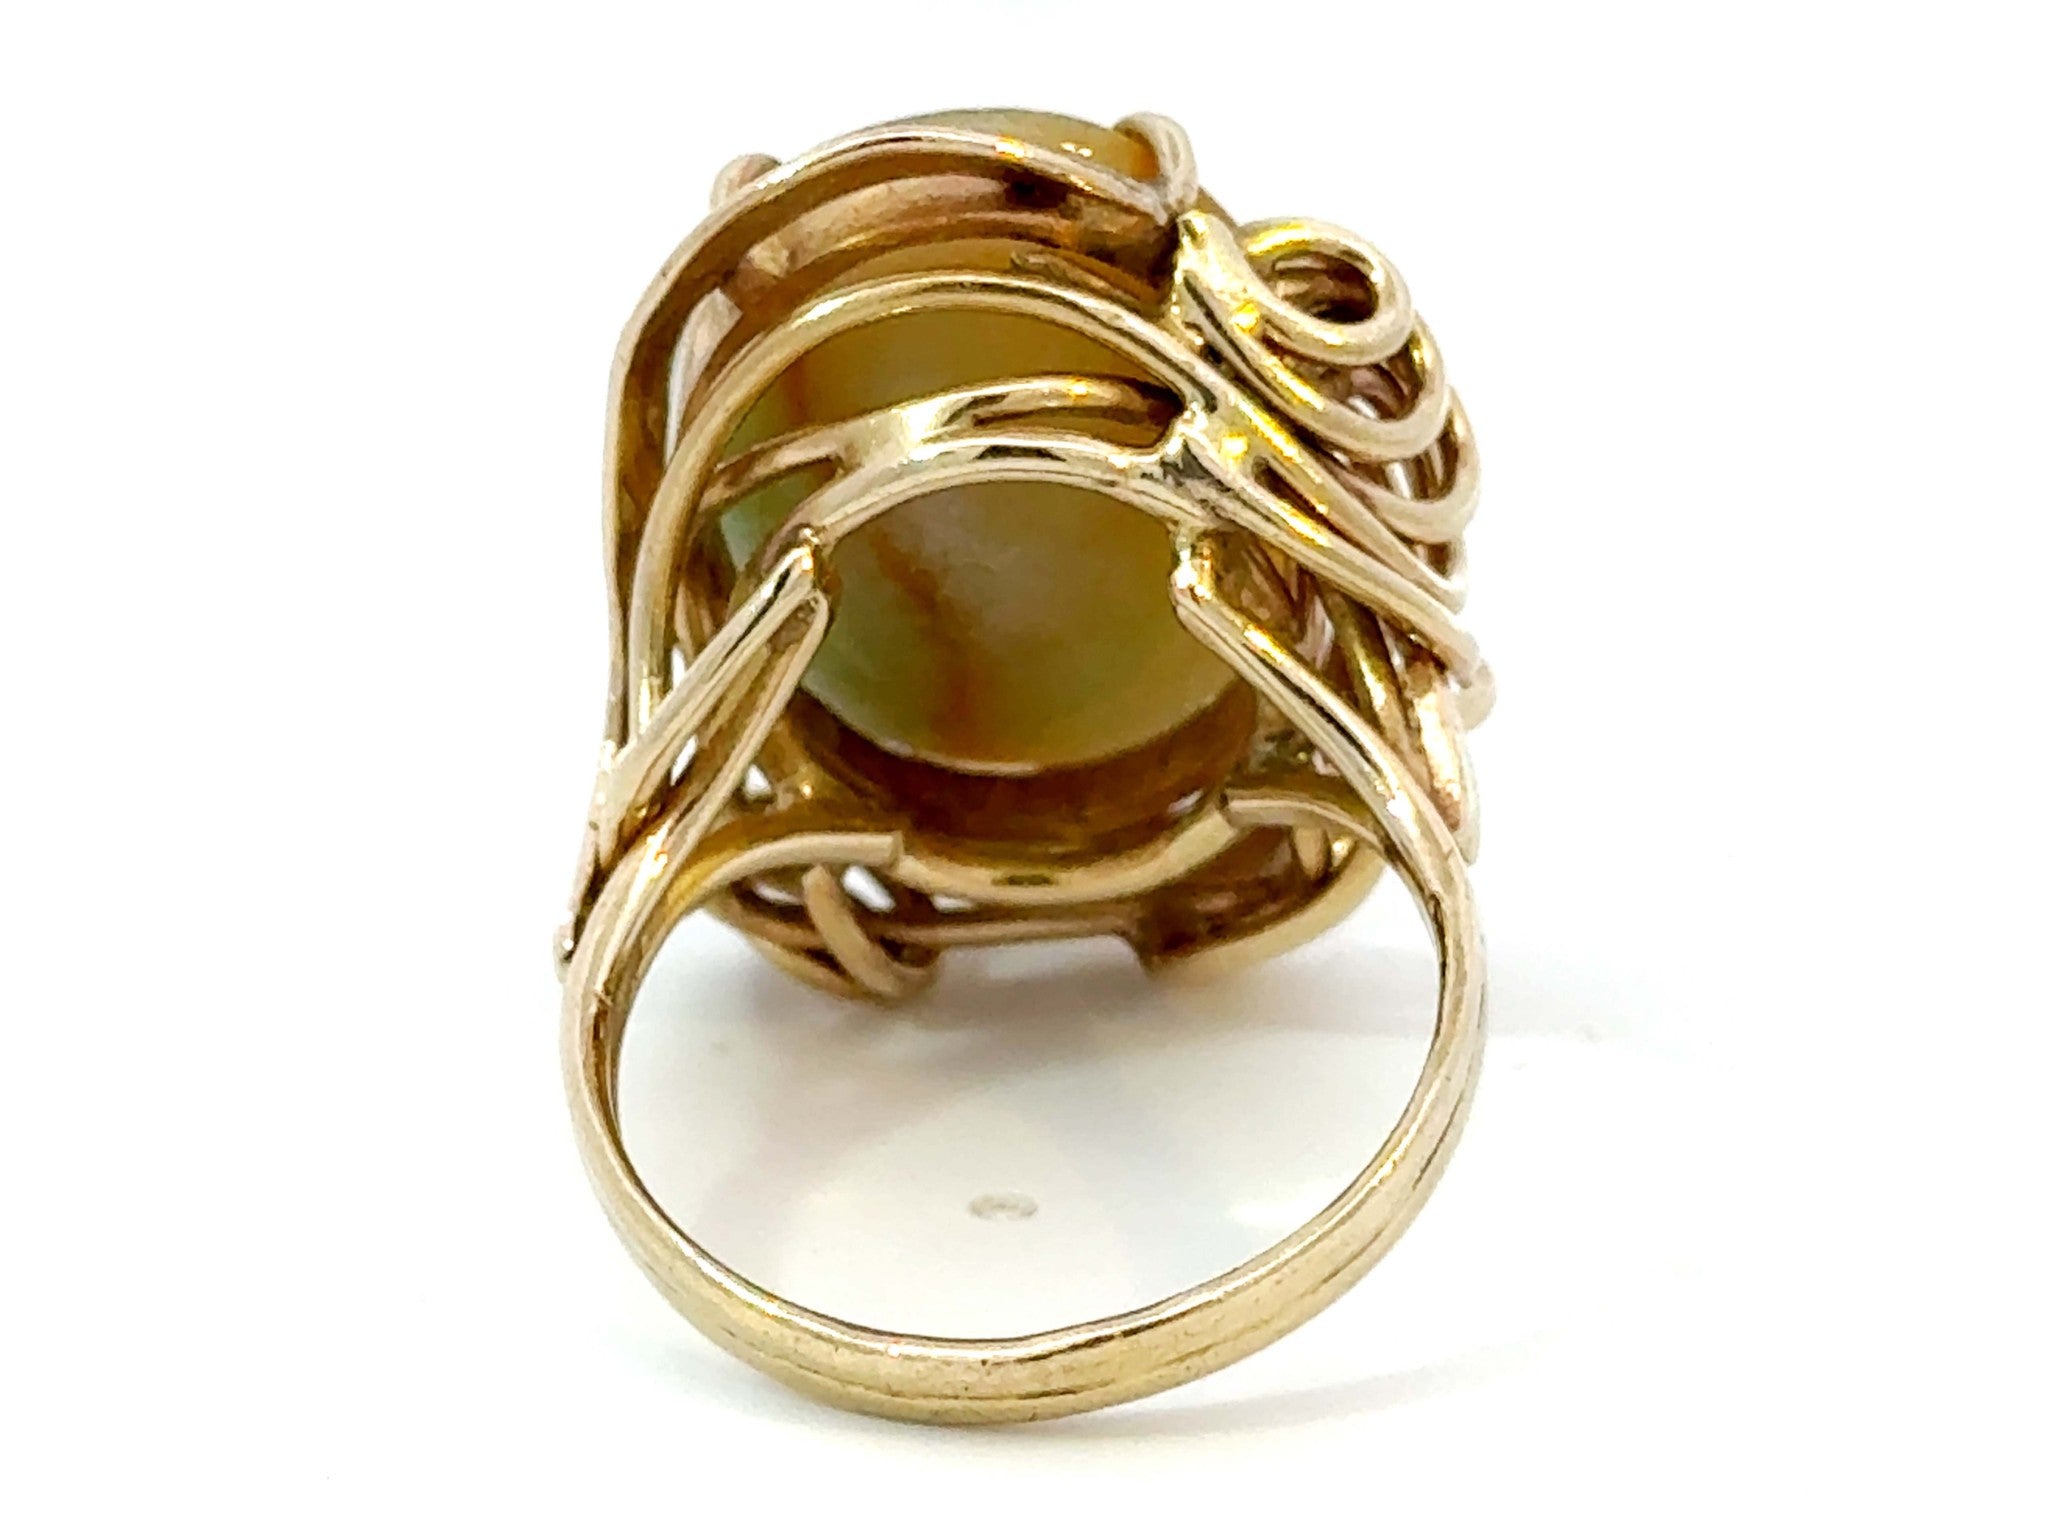 Oval Pale Green and Brown Jade Ring 14k Yellow Gold